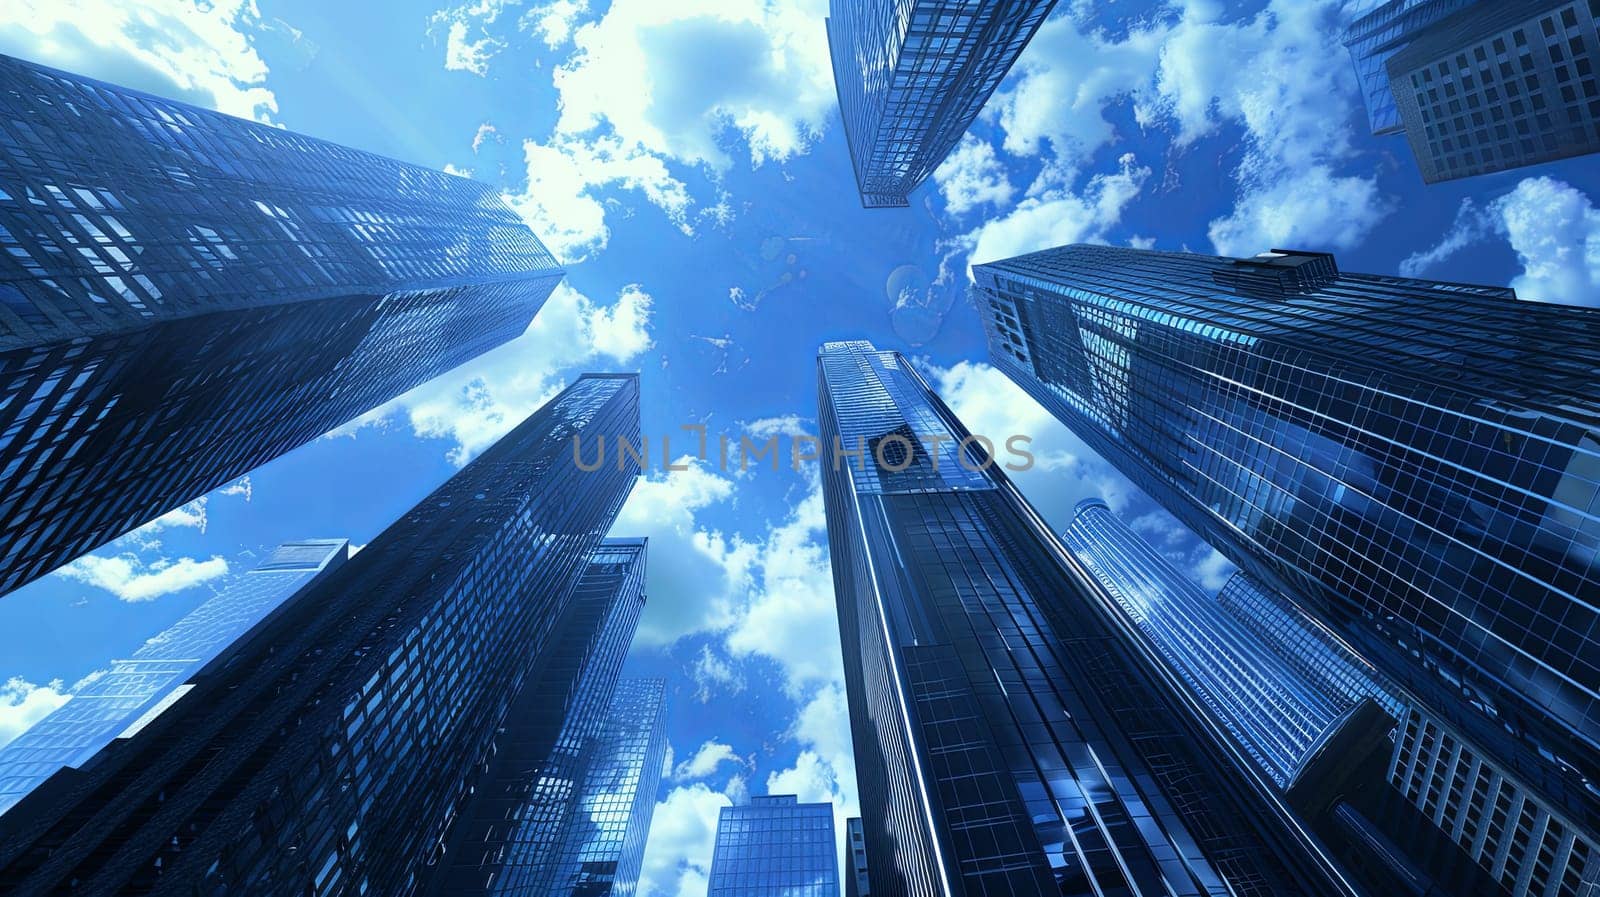 View from below of tall city buildings, known as skyscrapers, creating a towering urban landscape in a busy financial center.